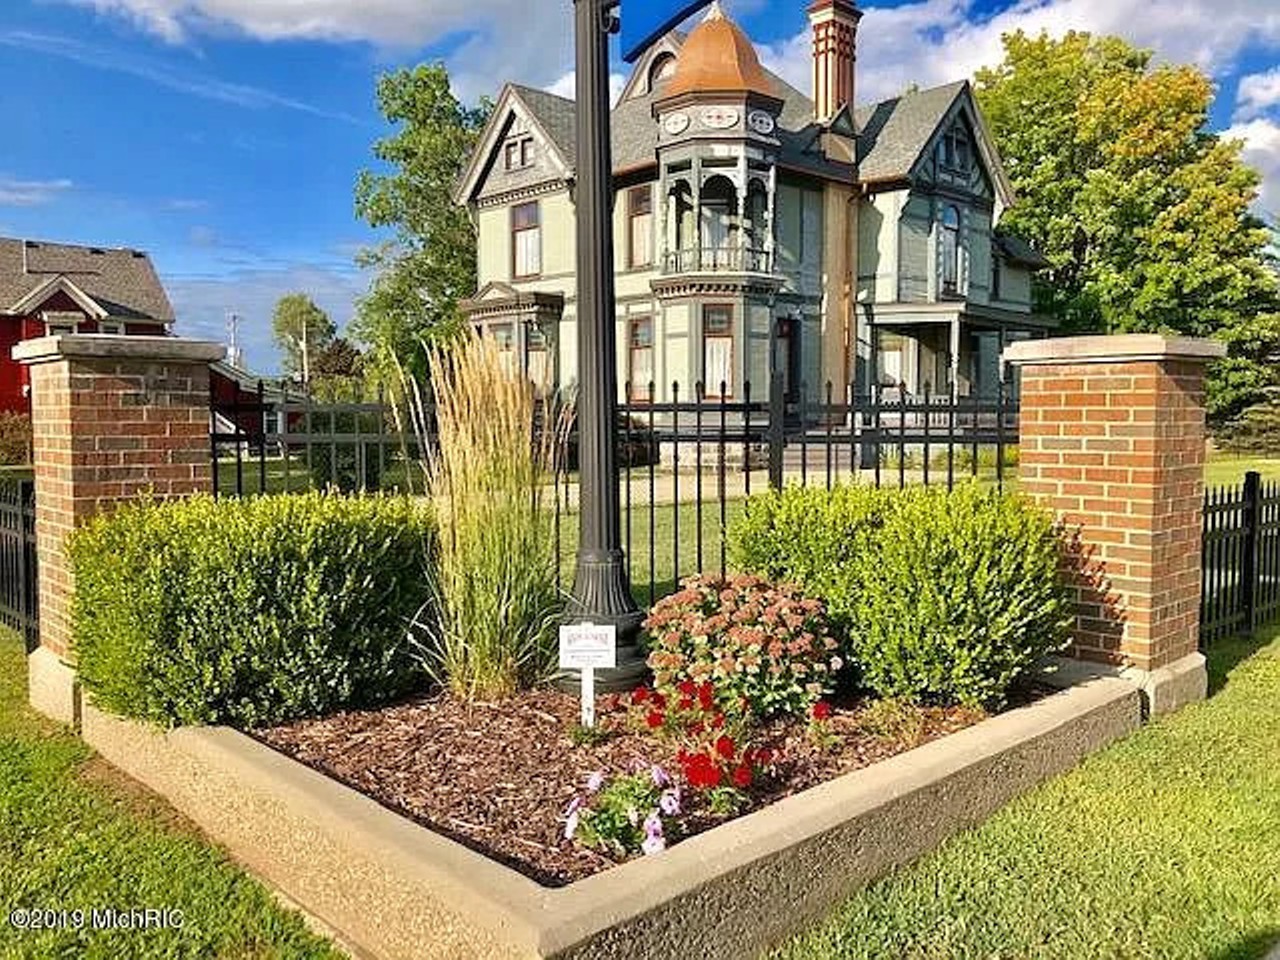 This 1885 Queen Anne House for sale was built by former Michigan Secretary of State Daniel Striker